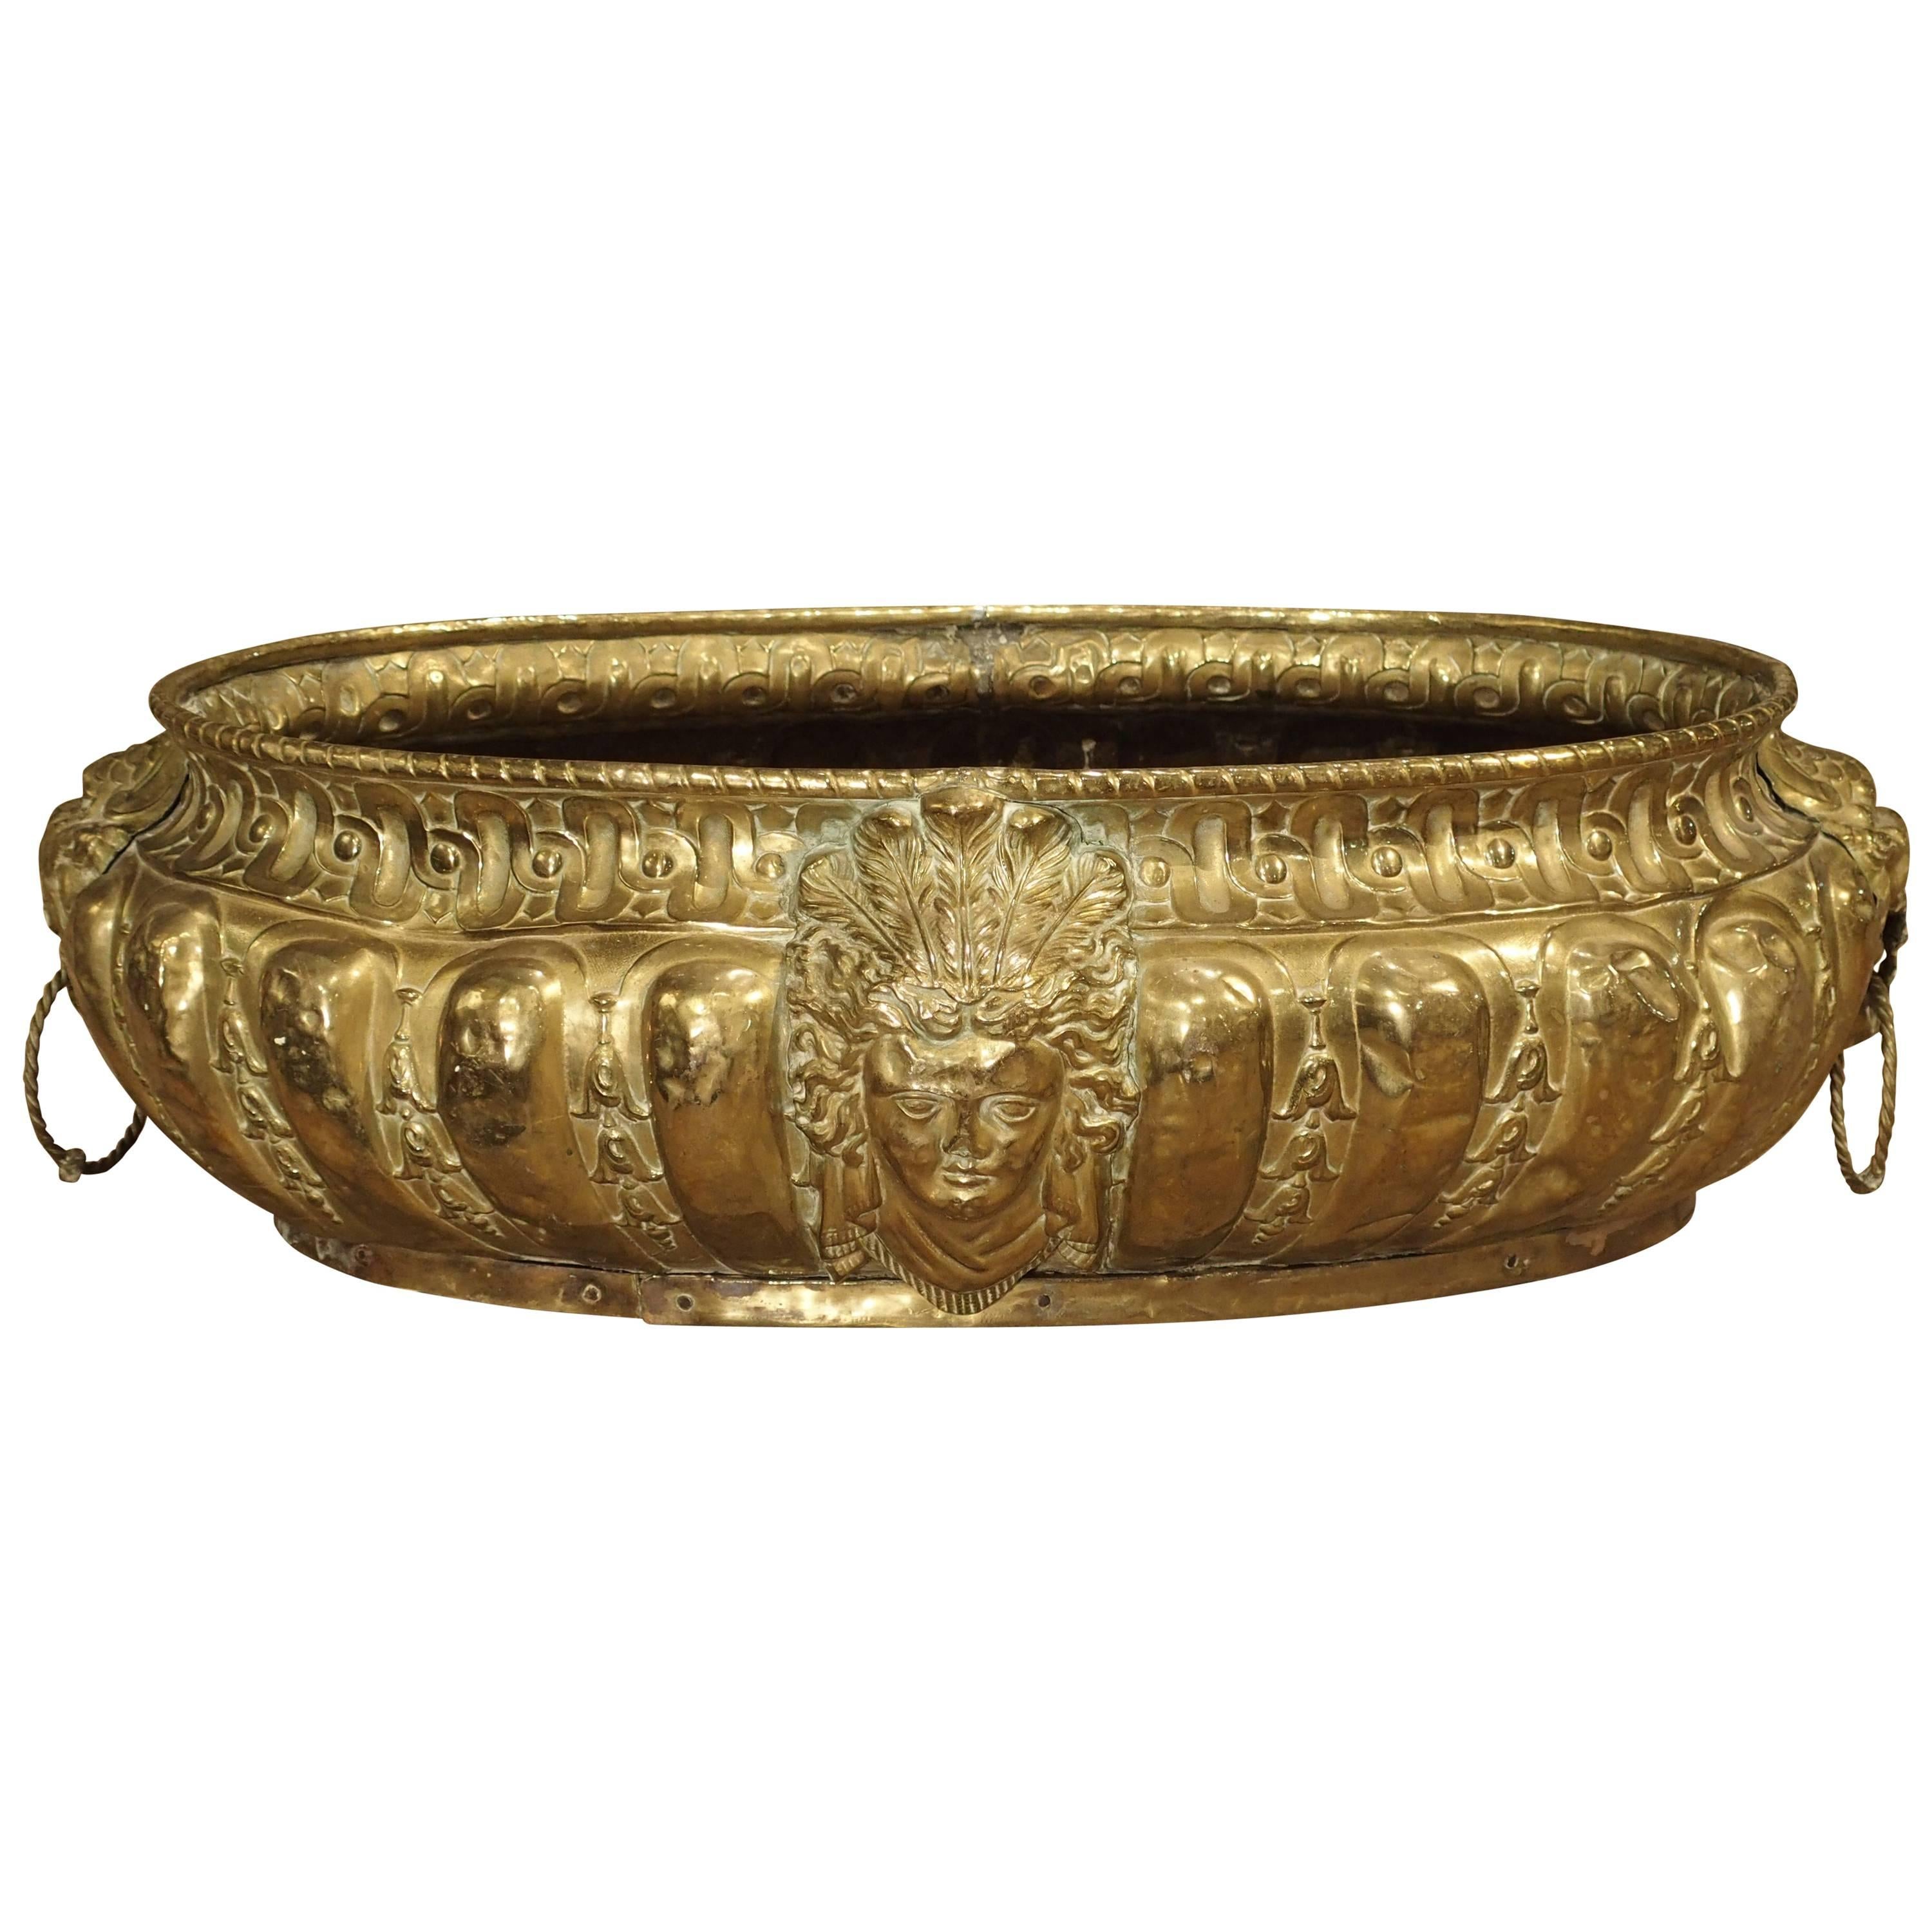 Large Antique Brass Jardiniere from France, circa 1860